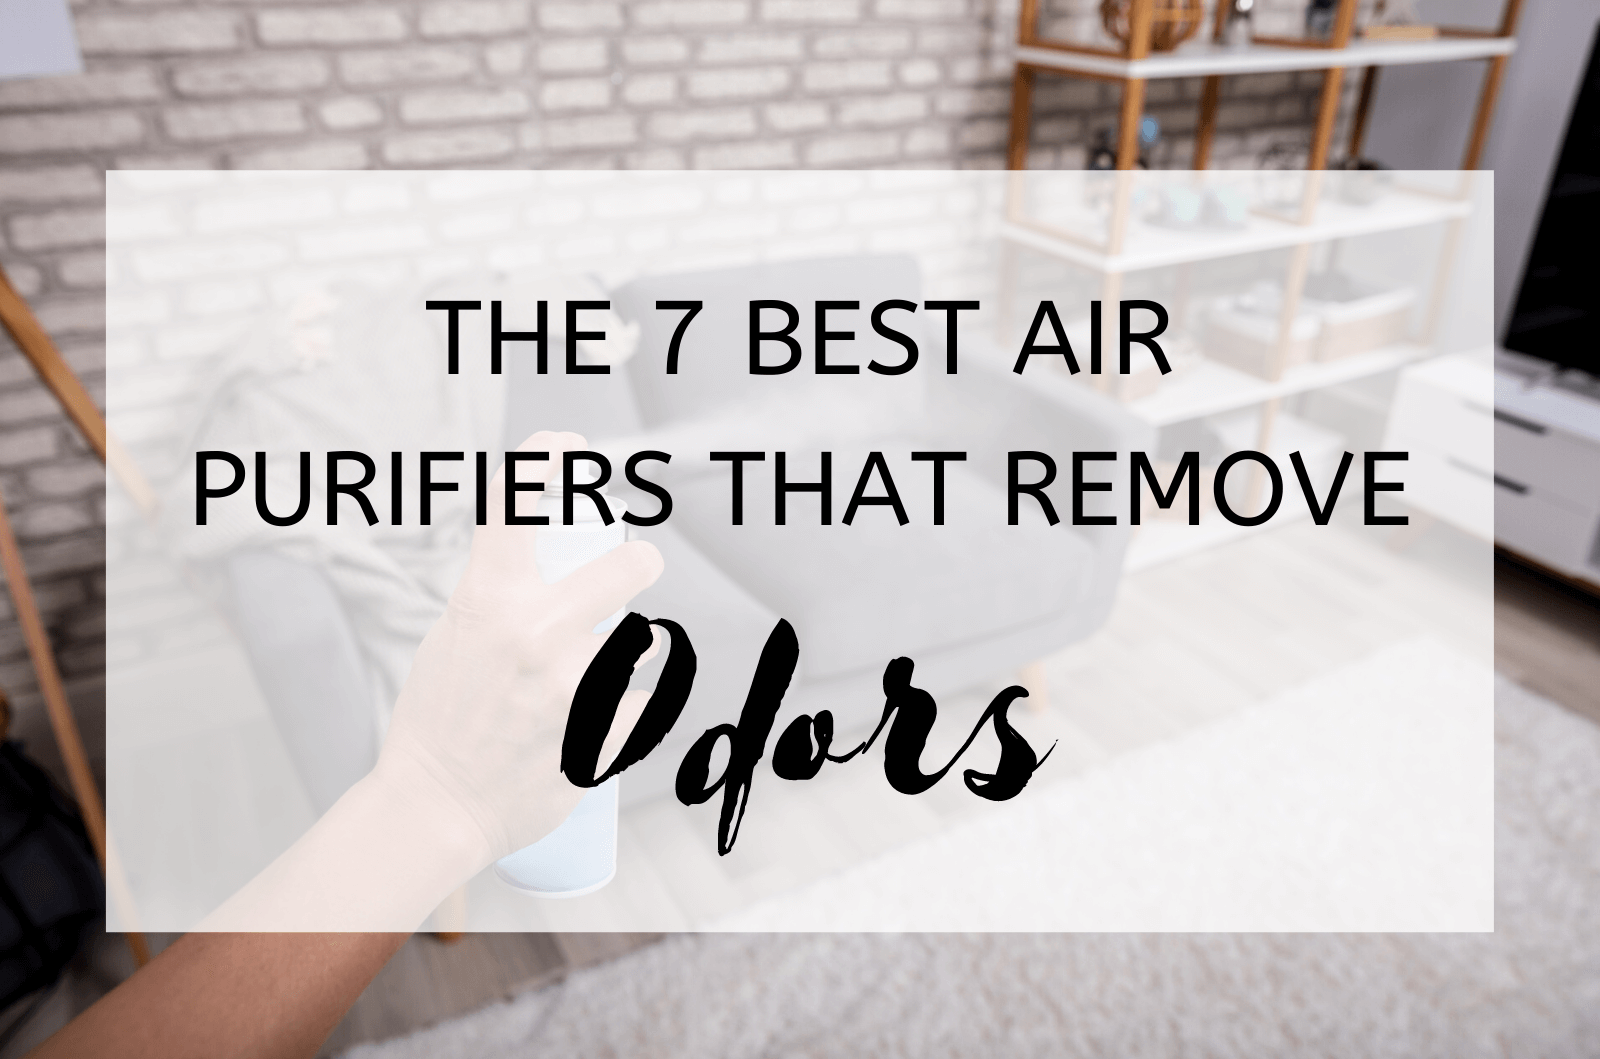 The 7 Best Air Purifiers That Remove Odors